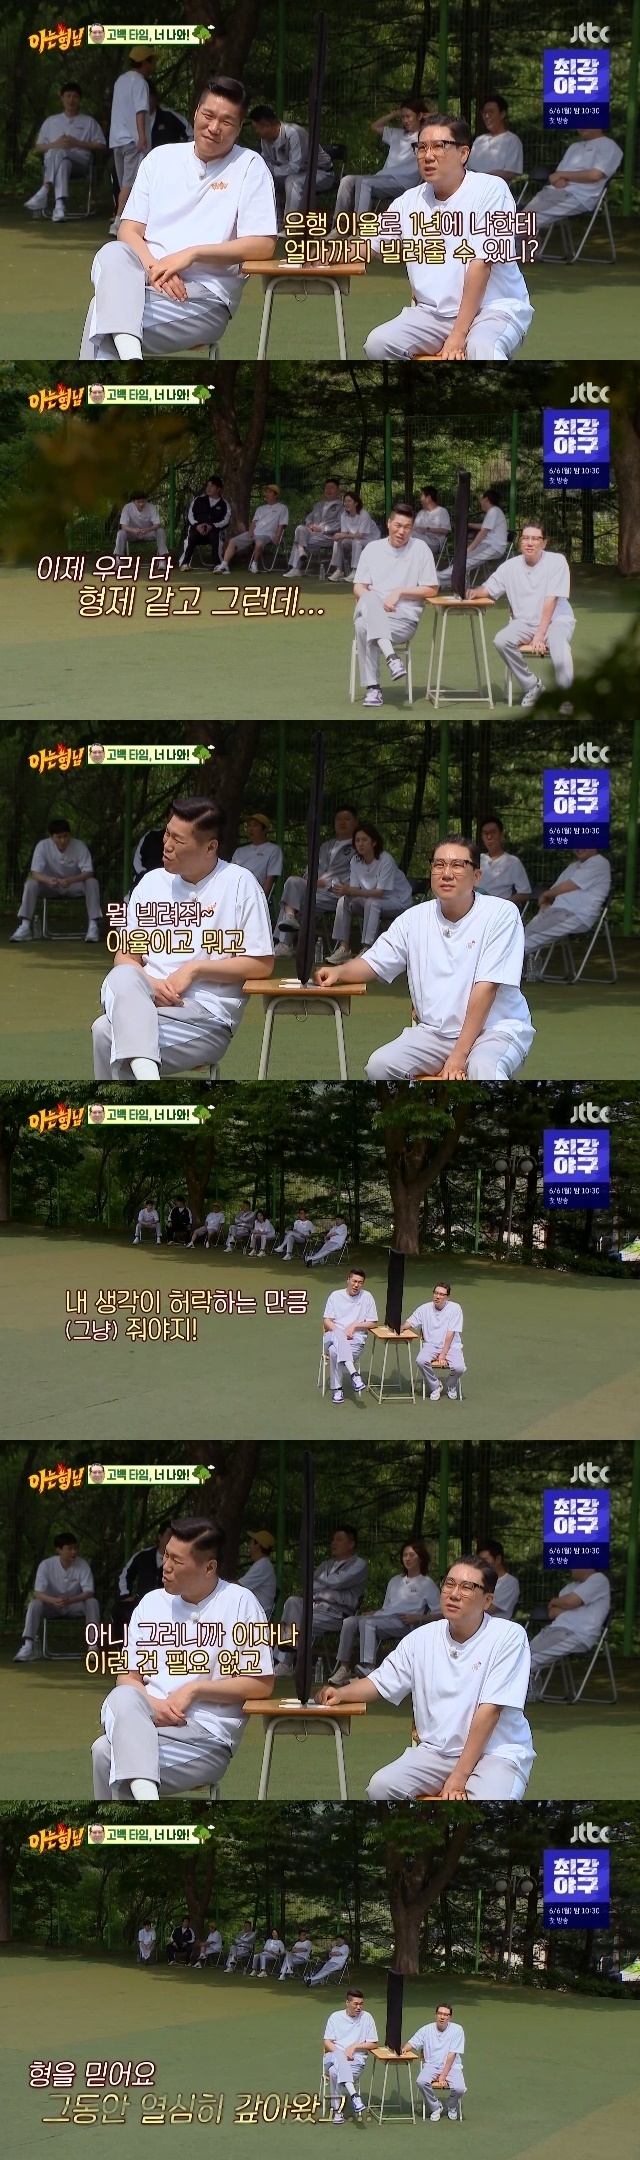 The steamed friendship between Seo Jang-hoon and Lee Sang-min was impressed.In the 335th JTBC entertainment Knowing Bros (hereinafter referred to as Knowing Bros) broadcast on June 4, the brothers own brothers school unity competition was held.Lee Sang-min asked Seo Jang-hoon, How much can you lend me a year at the bank interest rate?So, Seo Jang-hoon said, I will tell you honestly, we are all like brothers, but what do you lend me? I will give you as much as I can think of.Lee Sang-min said: But (I) make it so well, theres no problem paying it back now.I do not need interest, I believe in my brother, I have been paying hard, said Seo Jang-hoon, who continued the friendship test.Lee Sang-min expressed his impression, saying, Thank you very much, that is the will.There were also many warm moments: a corner where one Friend was picked to wrap up Gimbap, Lee Soo-geun wrapped up Gimbap for Shindong.Lee Soo-geun said, I was not hungry and I did not eat ours. Shindong was impressed by Lee Soo-geuns heart, who took care of himself.For Lee Soo-geun, Gimbap was handed over with a poorly crafted Seo Jang-hoon.The name of the simple Gimbap, which has nothing else but carrots and cucumbers, is Gimbap for Lee Soo-geun.I have a lot of things I can not eat because I am with my extremity, said Seo Jang-hoon. I have lost all the bad things in my health.Lee Soo-geun delivered the flavour, saying it was a healthy gimbap.Lee Sang-min said in Confessions Time that Thank you for listening to the mutterings to yourself in the back seat for about seven years and telling the friends what is fun.Lee Soo-geun said, Im sorry I didnt do it any more.One day I have a lot of talk, but I have heard it all and I have missed it myself. Lee Sang-min apologized, but Lee Sang-min still expressed his gratitude.Lee Jin-ho and Min Kyung Hoon have finally promised to exchange contacts.Min Kyung Hoon said in a one-on-one conversation with Lee Jin-ho, I did not contact anyone I knew for seven years, but I did not ask you to contact me.Min Kyung Hoon promised to ask for his number this time, and Lee Jin-ho promised to give Min Kyung Hoon a blind date.On this day, eight members enjoyed their athletic meet and talk without a guest, and the delightful scenes created by the members seven-year chemistry gave a pleasant smile to the viewers.